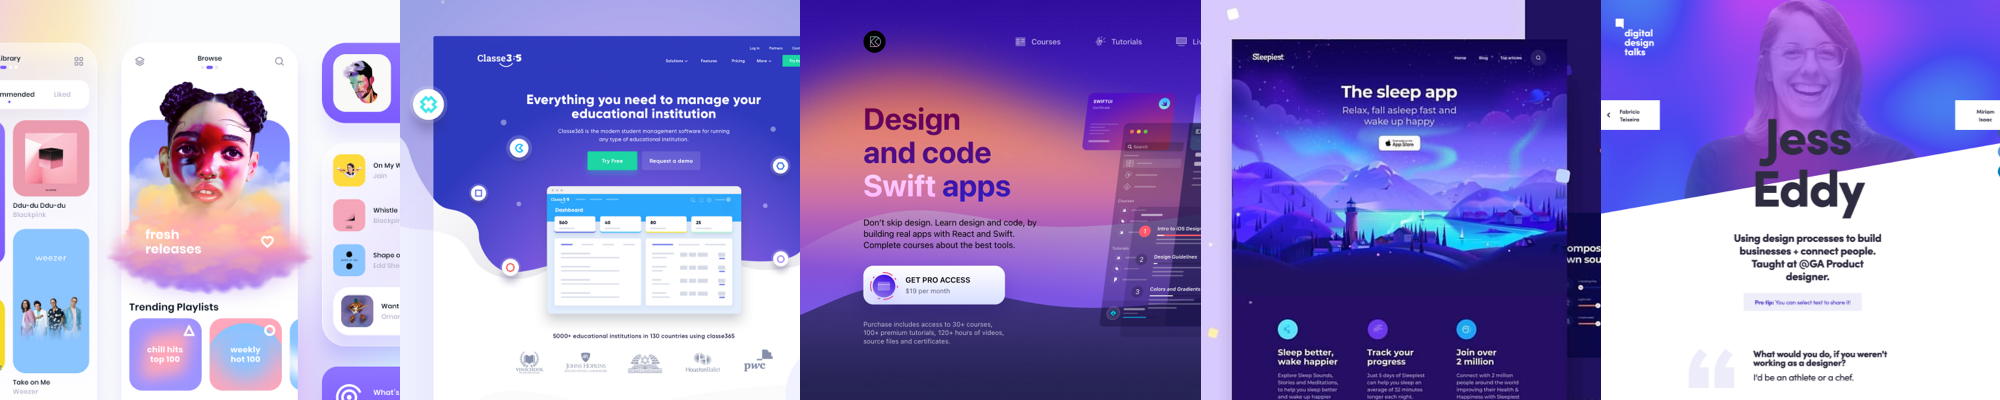 Examples of vivid colors in UI